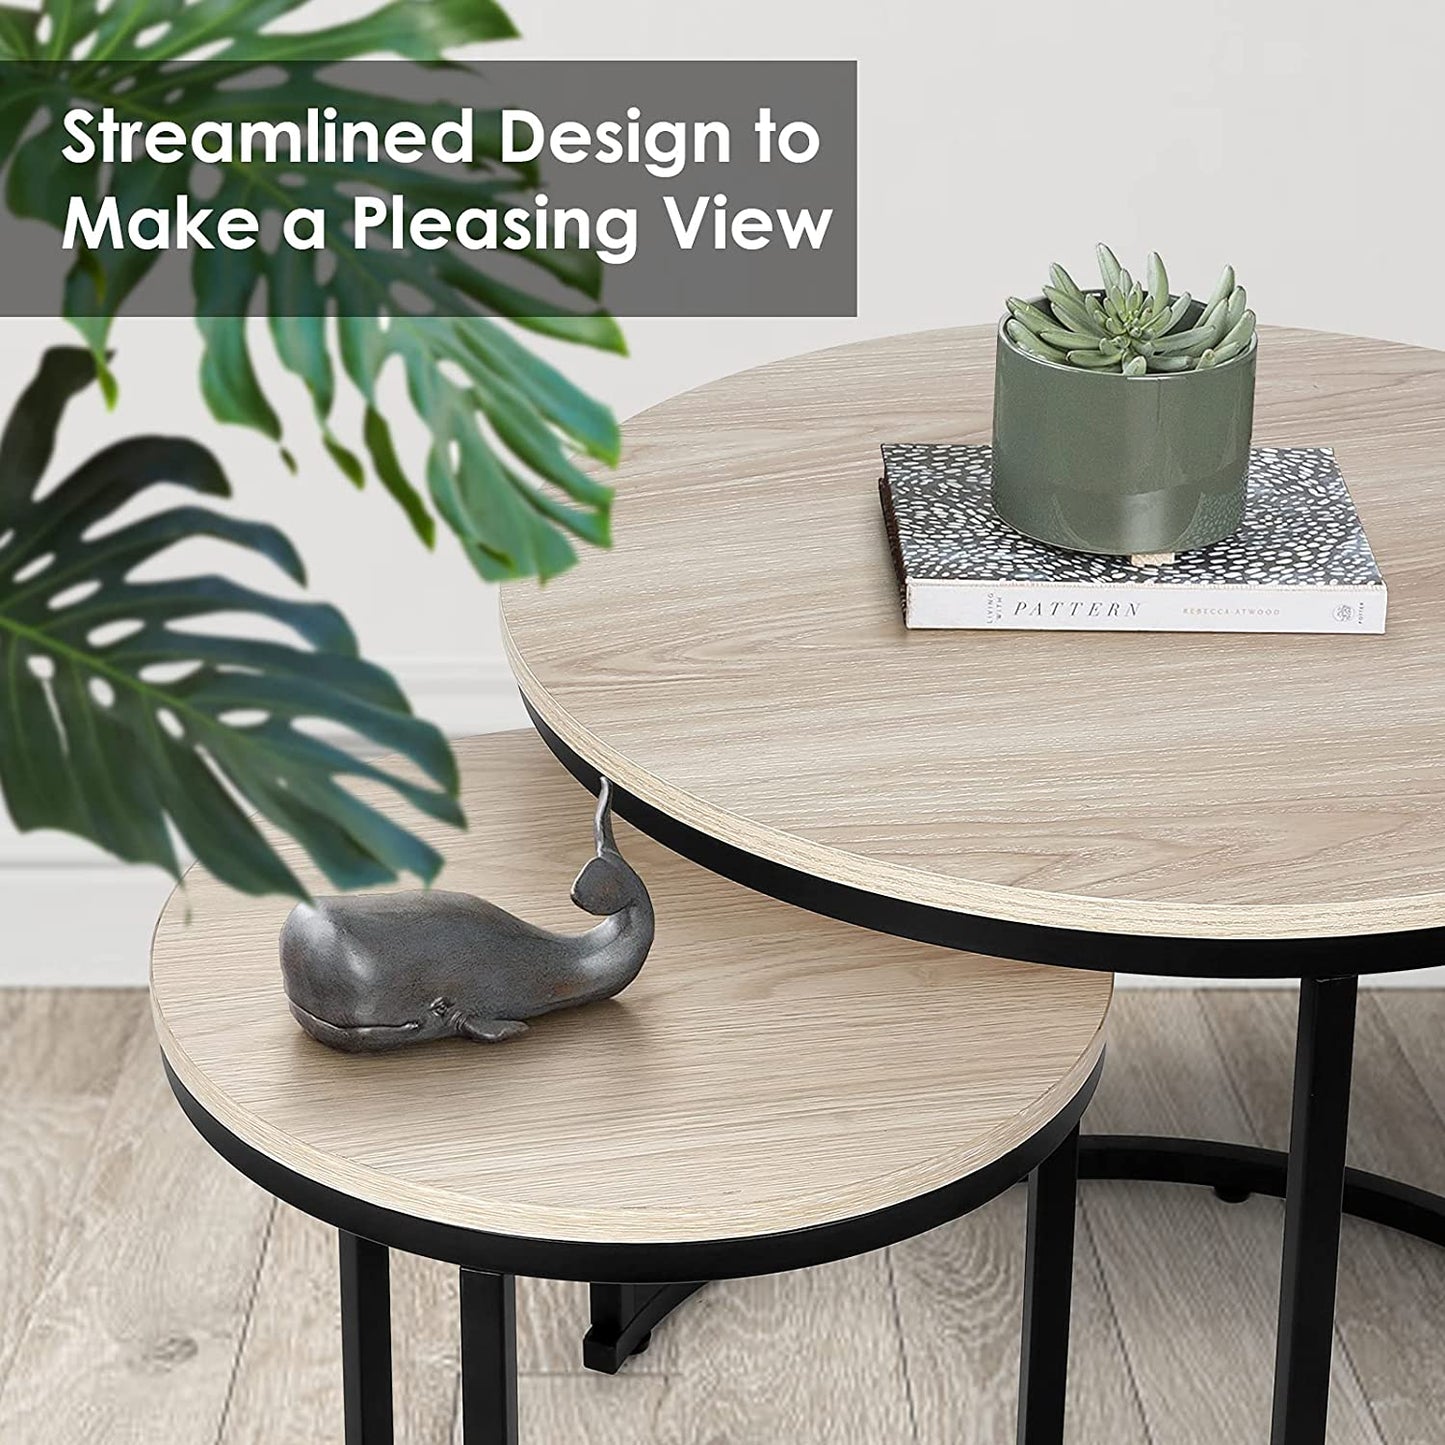 Nest Of Tables: Set of 2 for Living Room, Balcony, Garden, Round Table with Wood Side, Sturdy Metal Frame